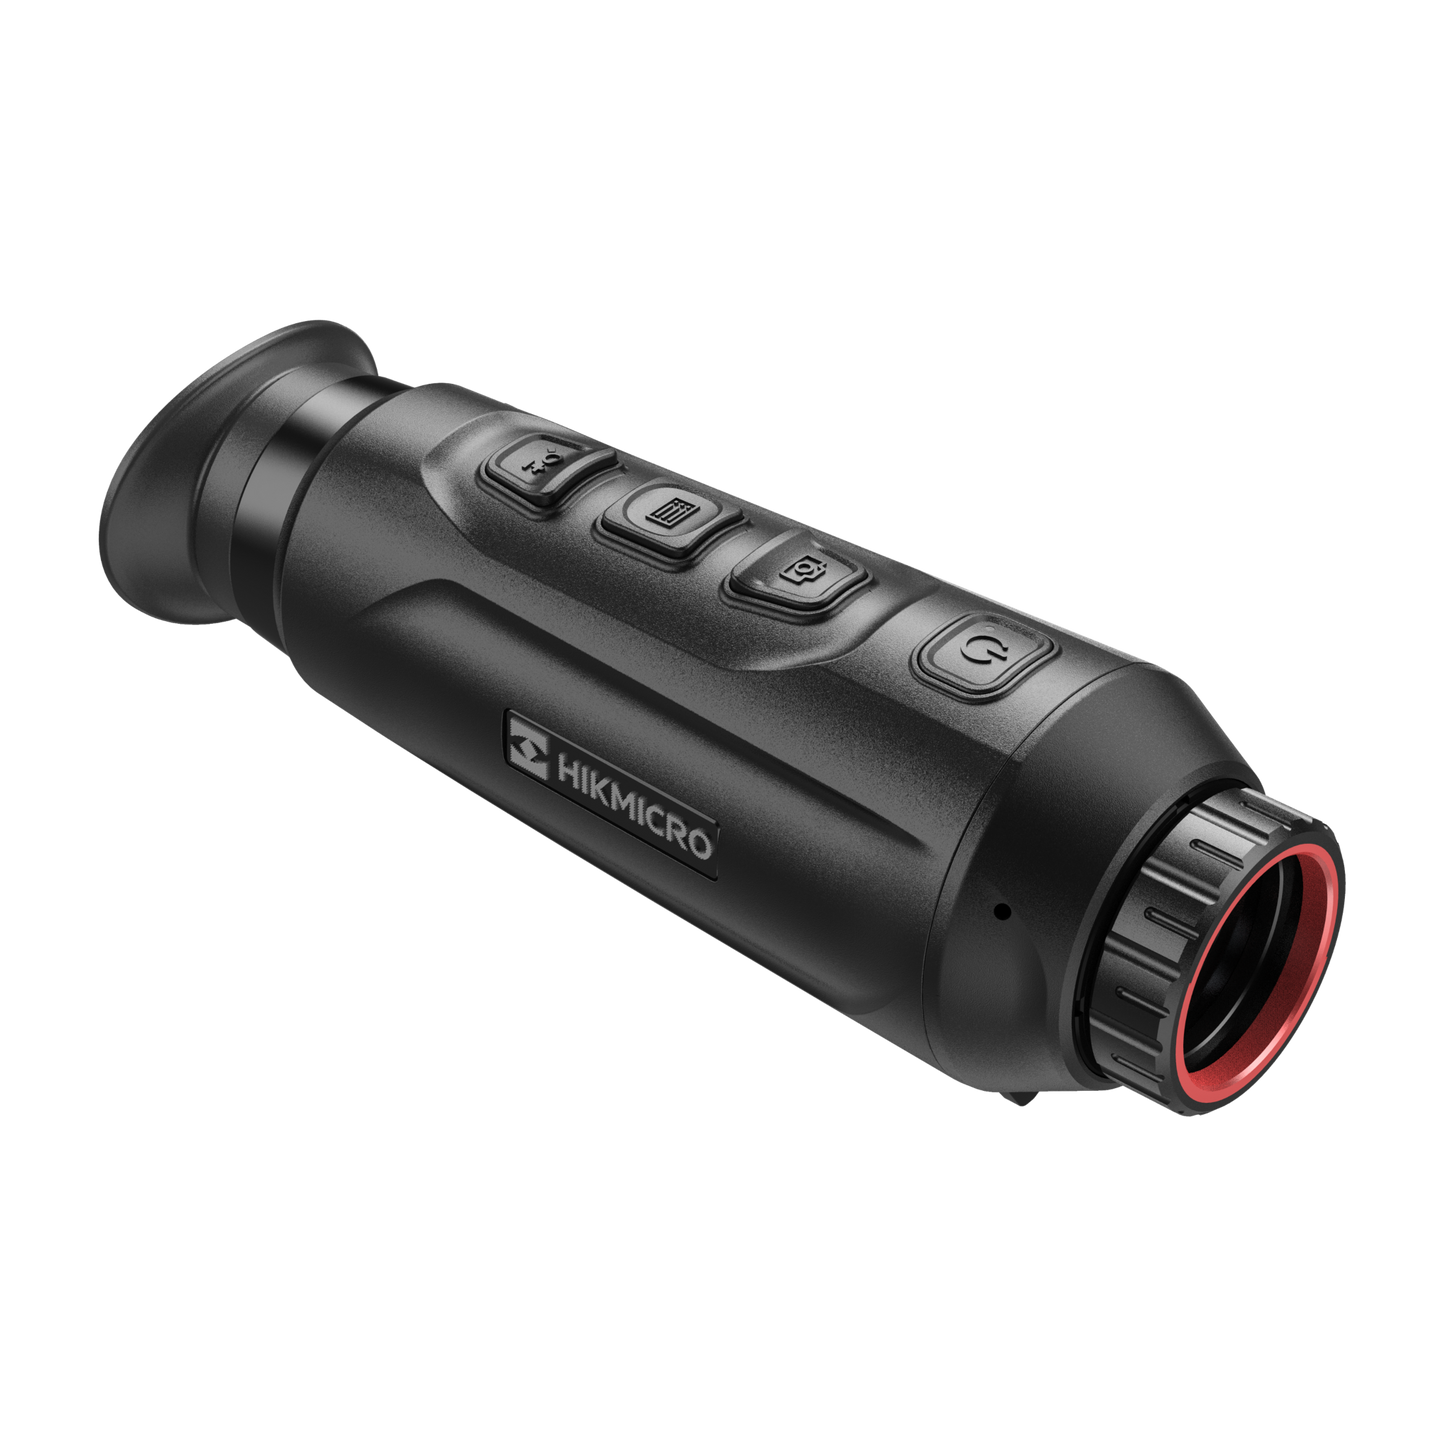 HikMicro Lynx LH25 2.0 Monocular front right view